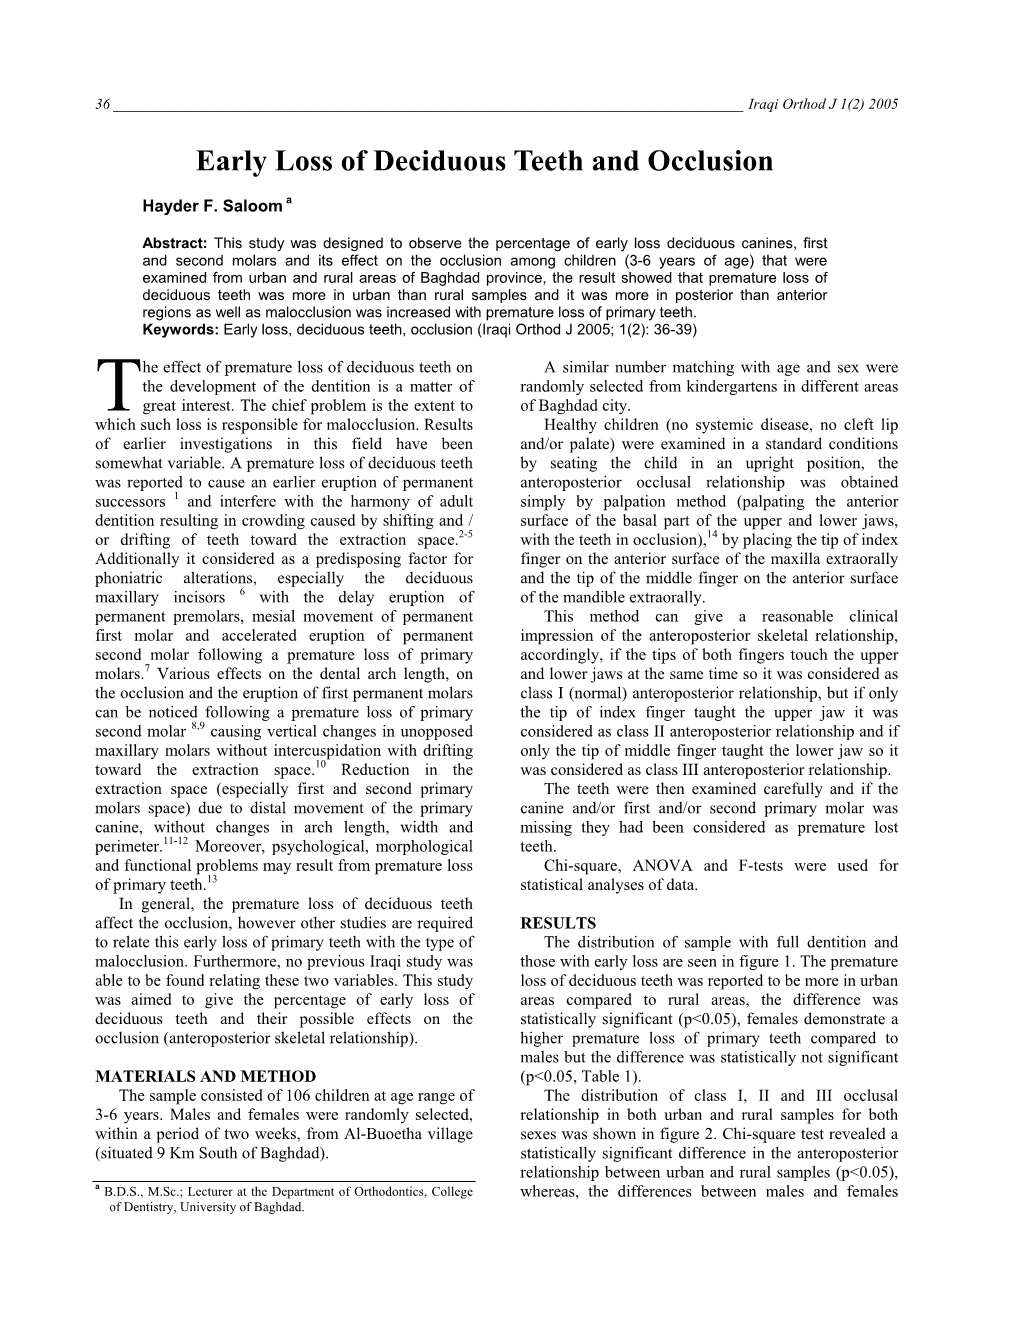 Early Loss of Deciduous Teeth and Occlusion